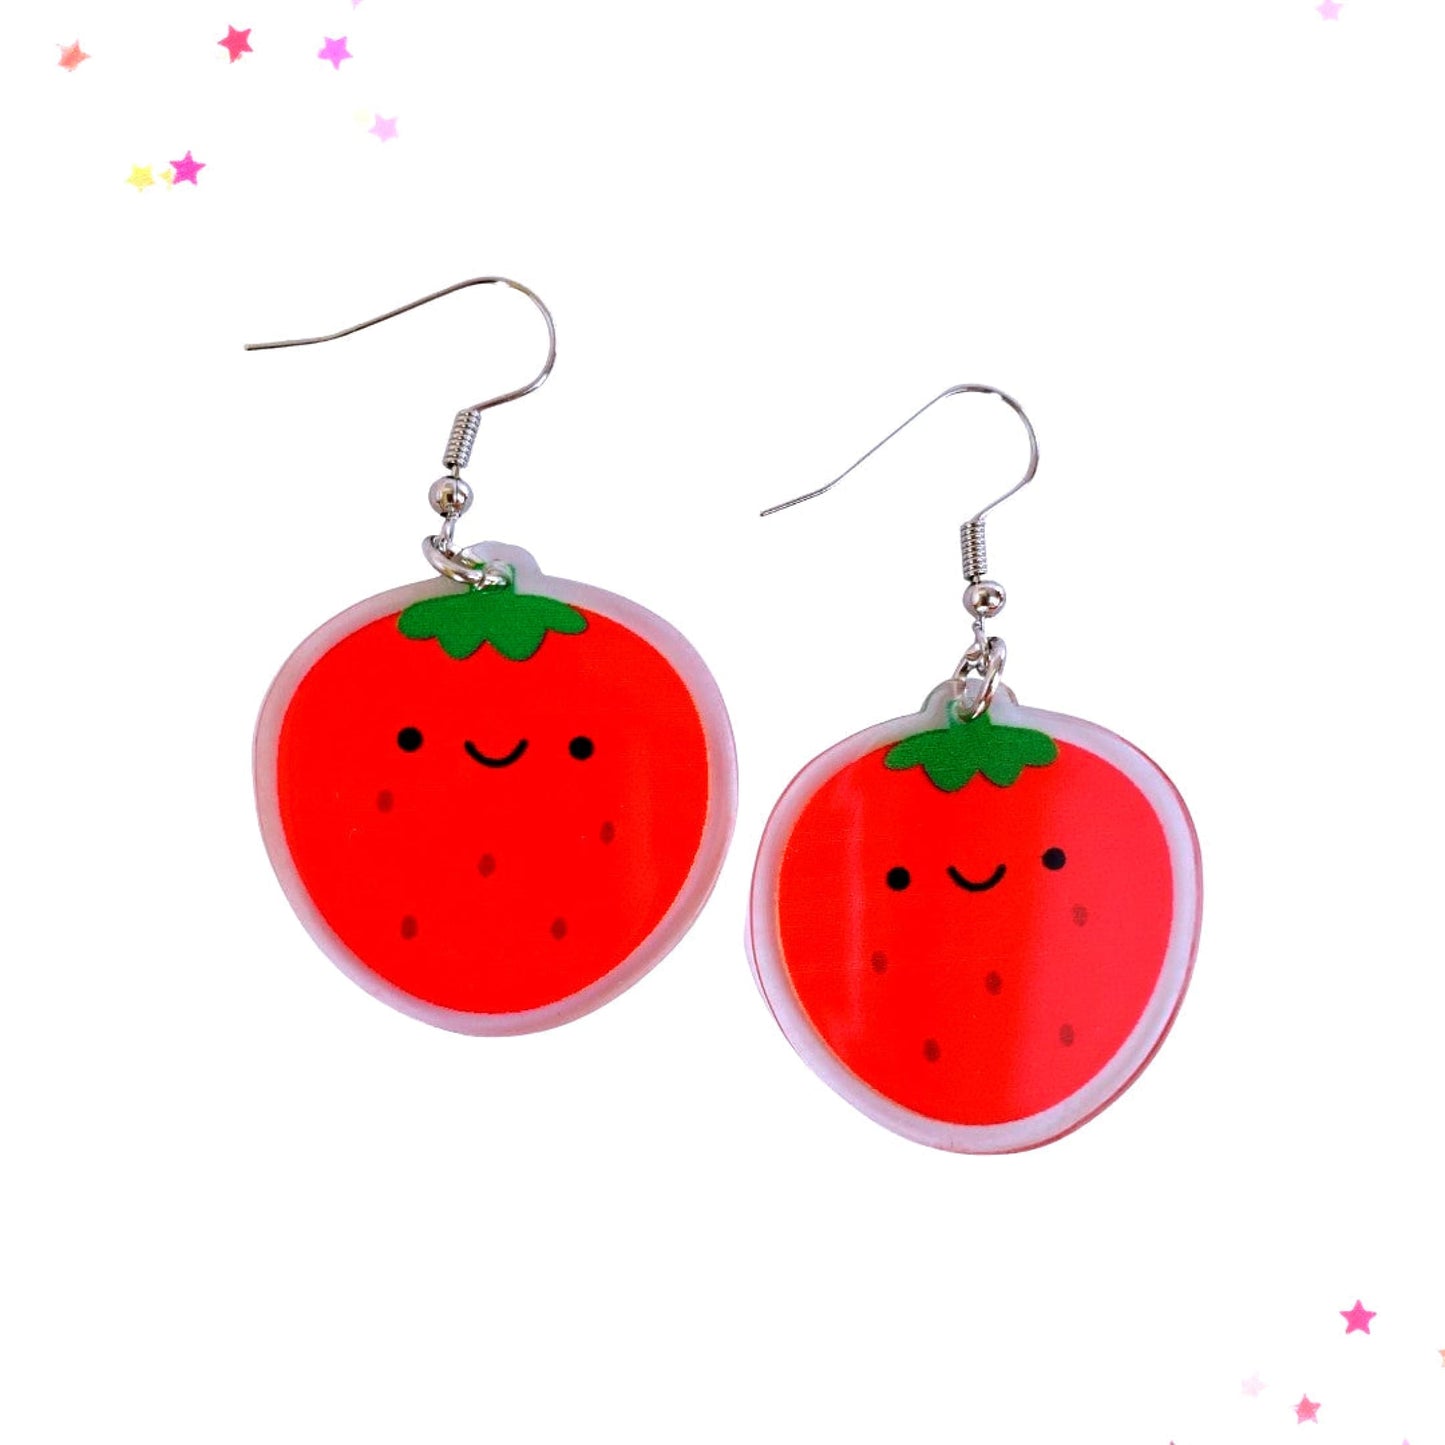 Kawaii Strawberry Acrylic Earrings from Confetti Kitty, Only 7.99